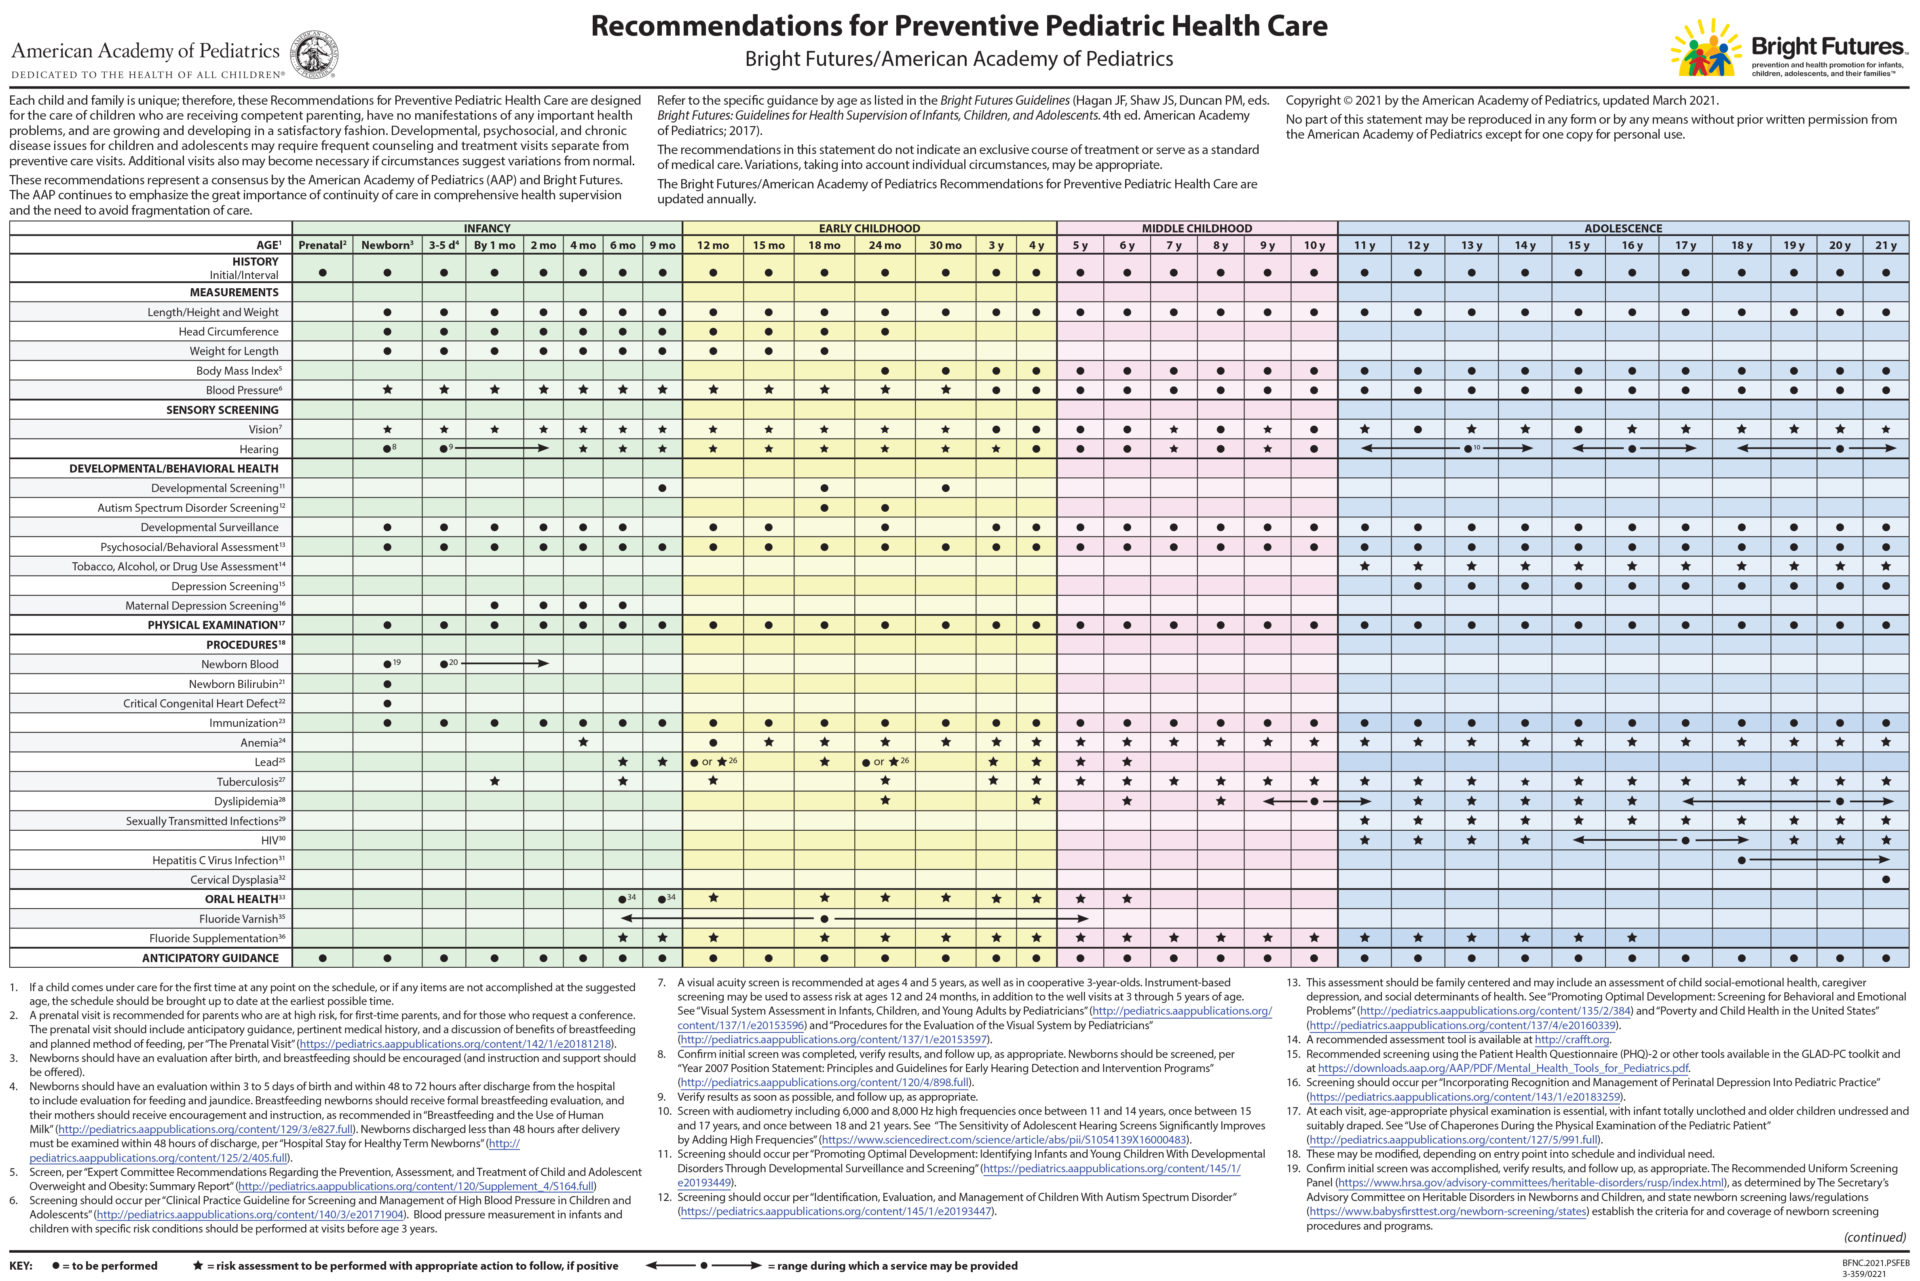 2021 Bright Futures/AAP Recommendations for Preventive Pediatric Health Care (Periodicity Schedule) in color showing all of the screenings recommended across 34 patient visits through a patient's twenty-second birthday